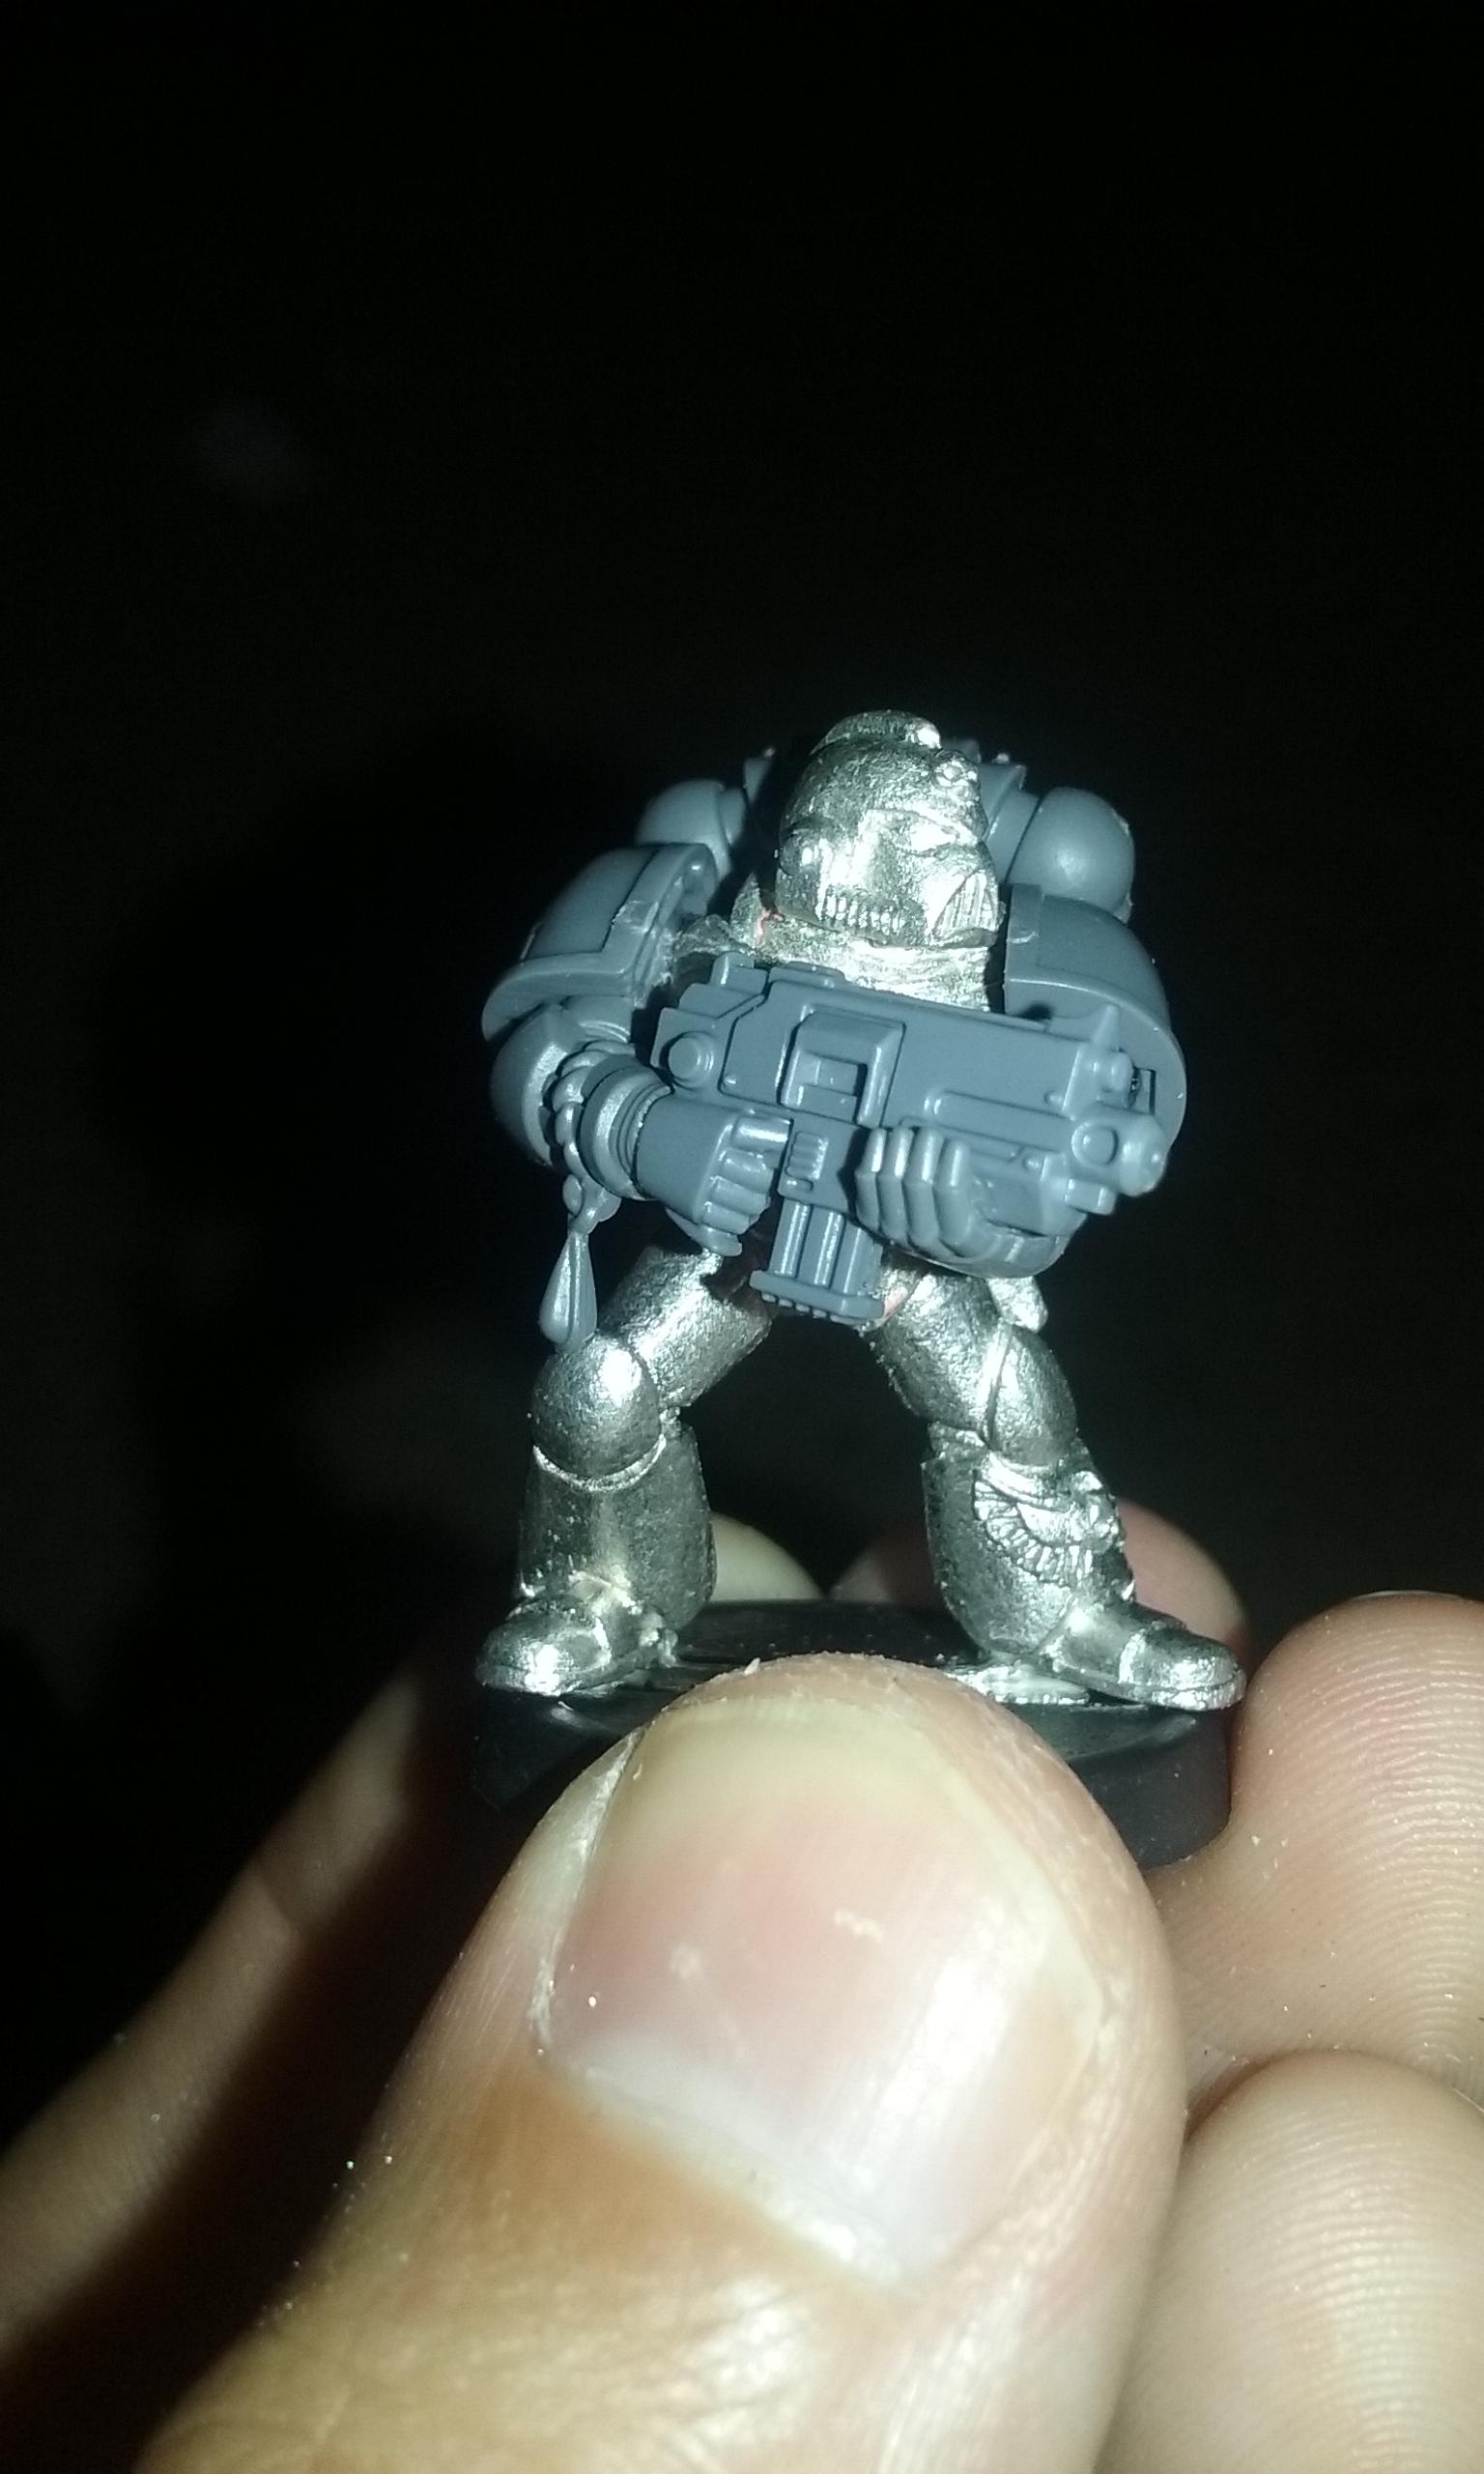 First test model